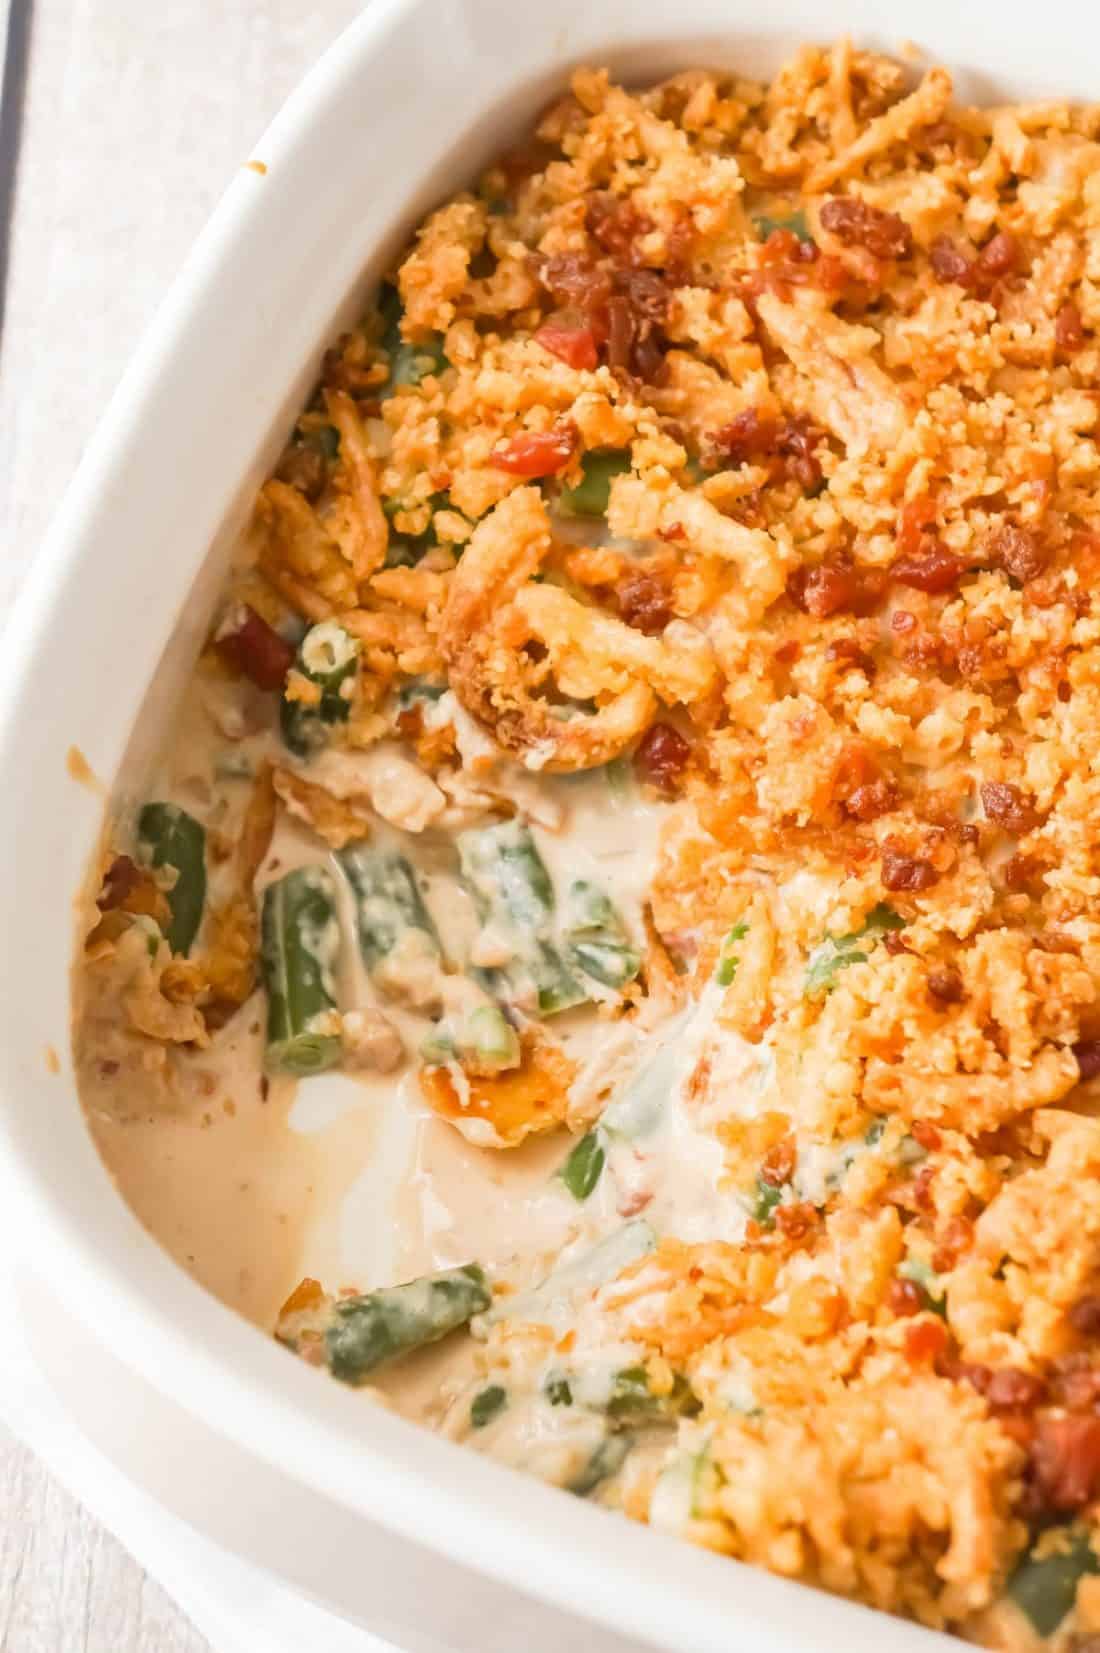 Cream Cheese and Bacon Green Bean Casserole - THIS IS NOT DIET FOOD